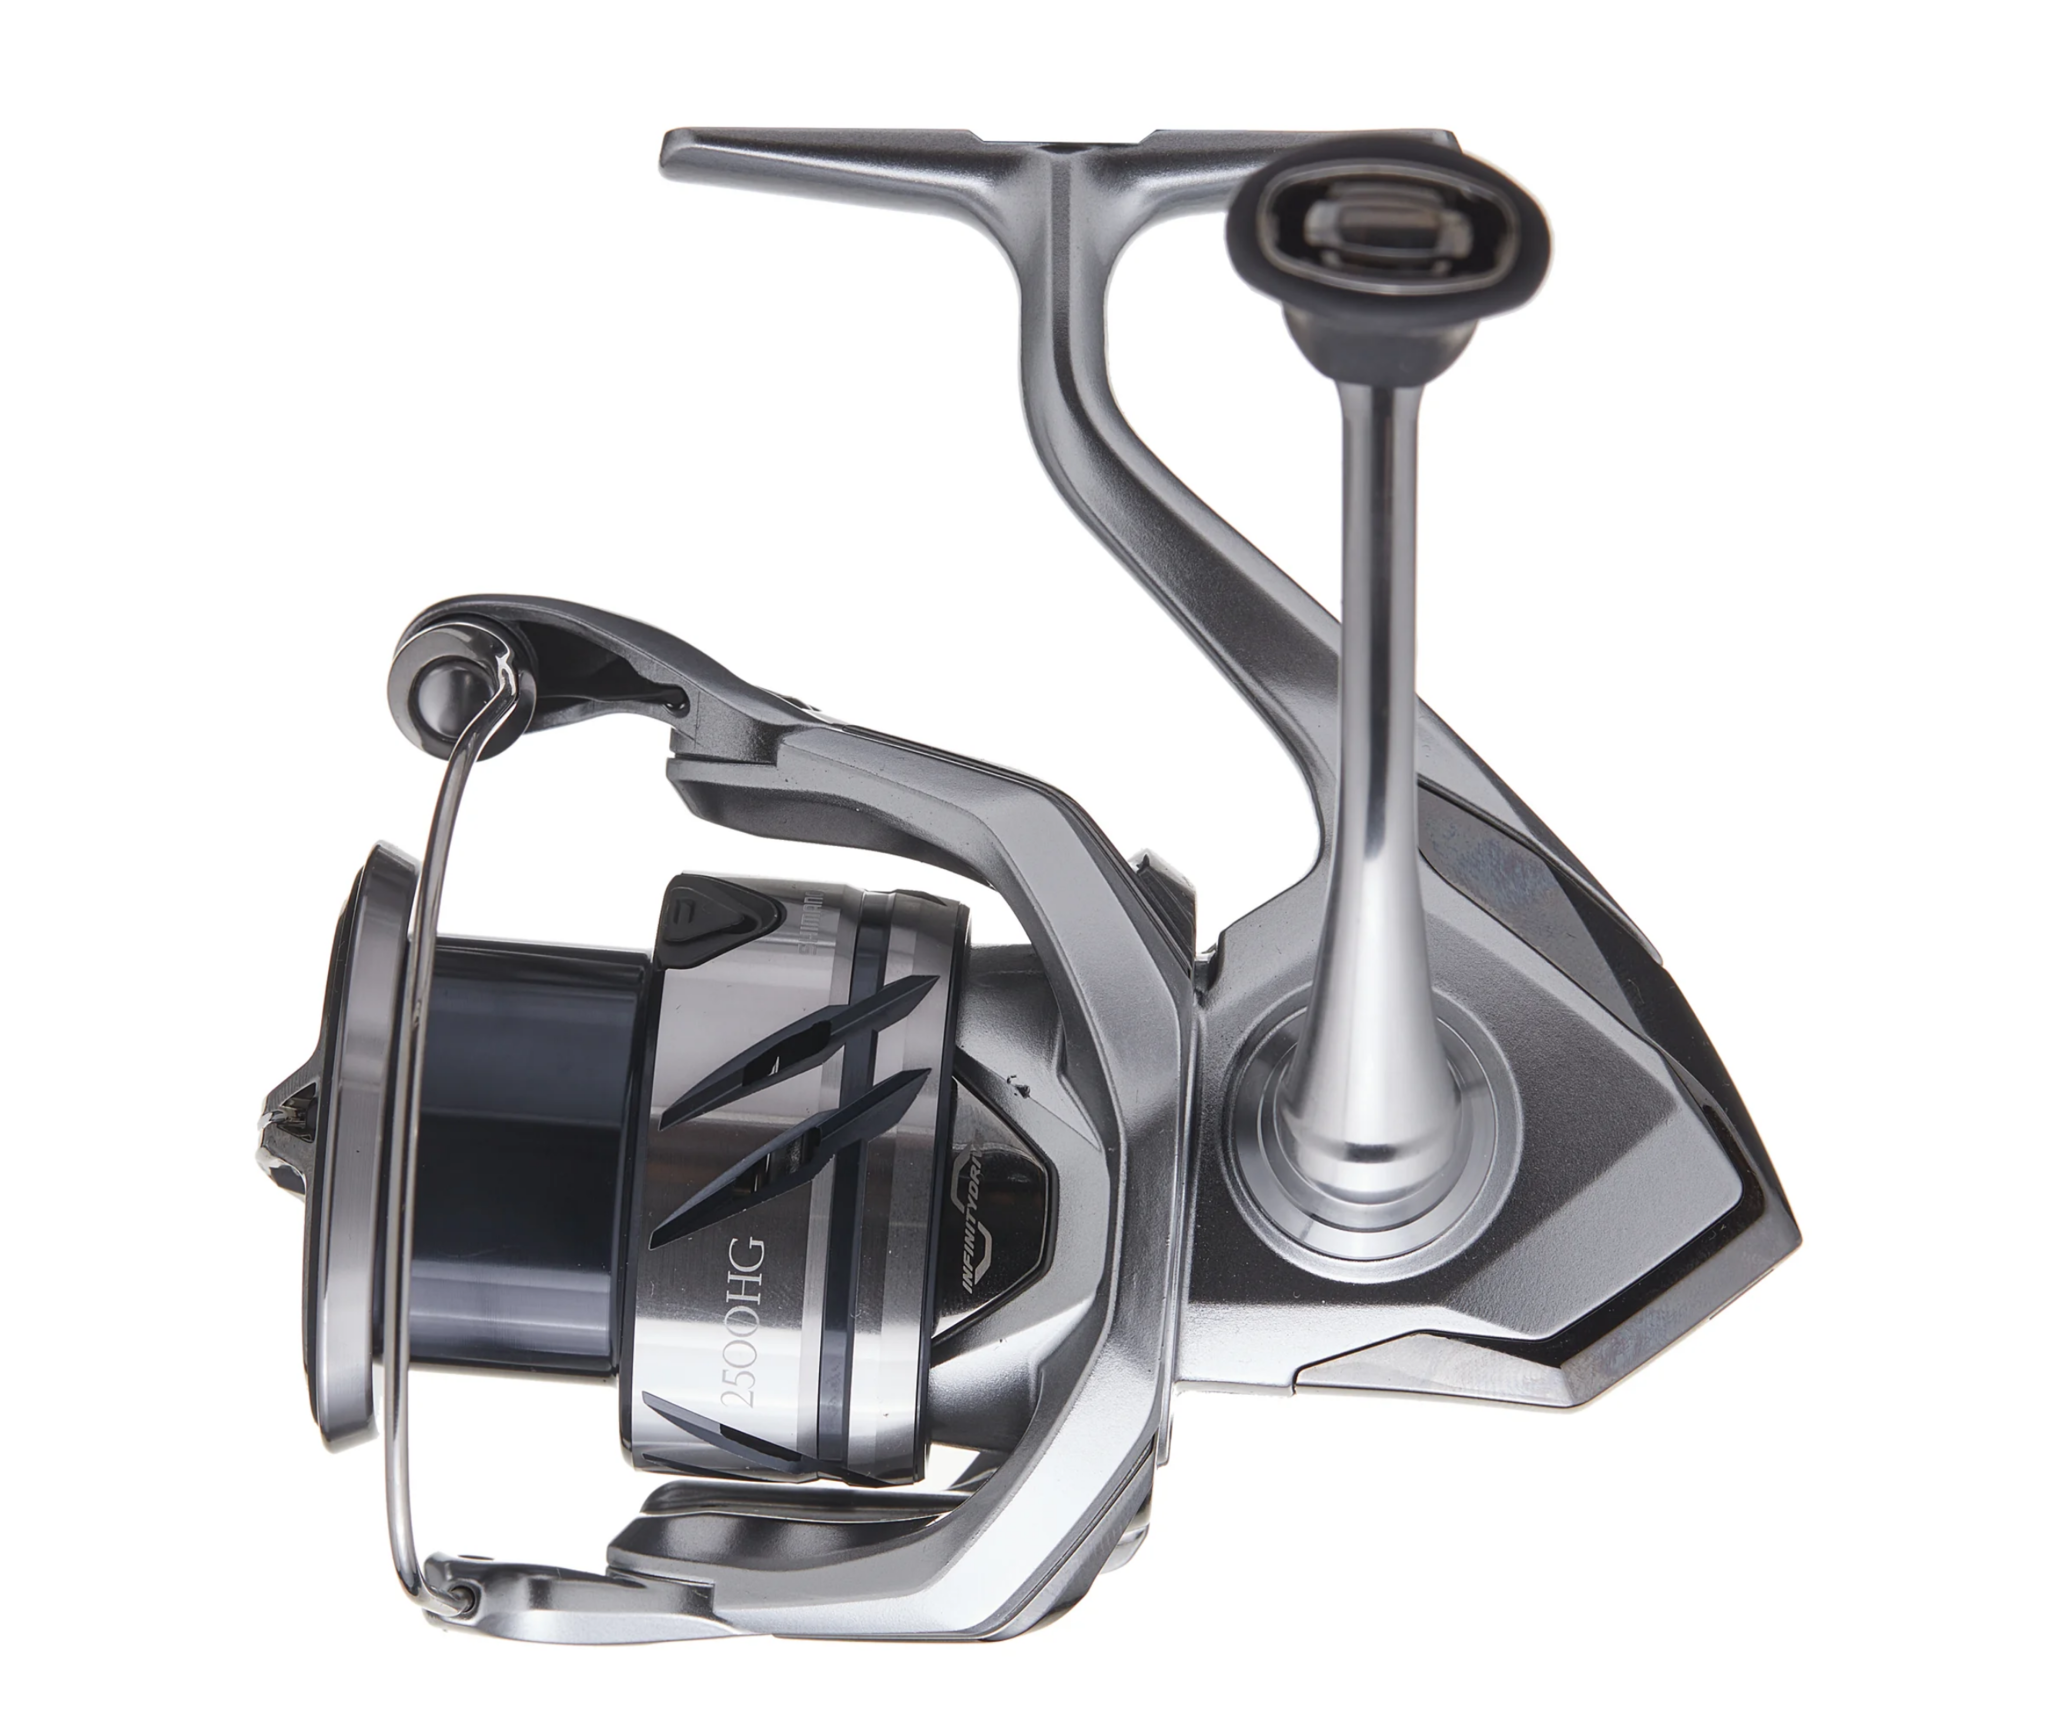 Stradic FM: Brand new standard 🔥 Check out Stradic FM's revolutionary reel  technology explained in the latest video on the Shimano Au